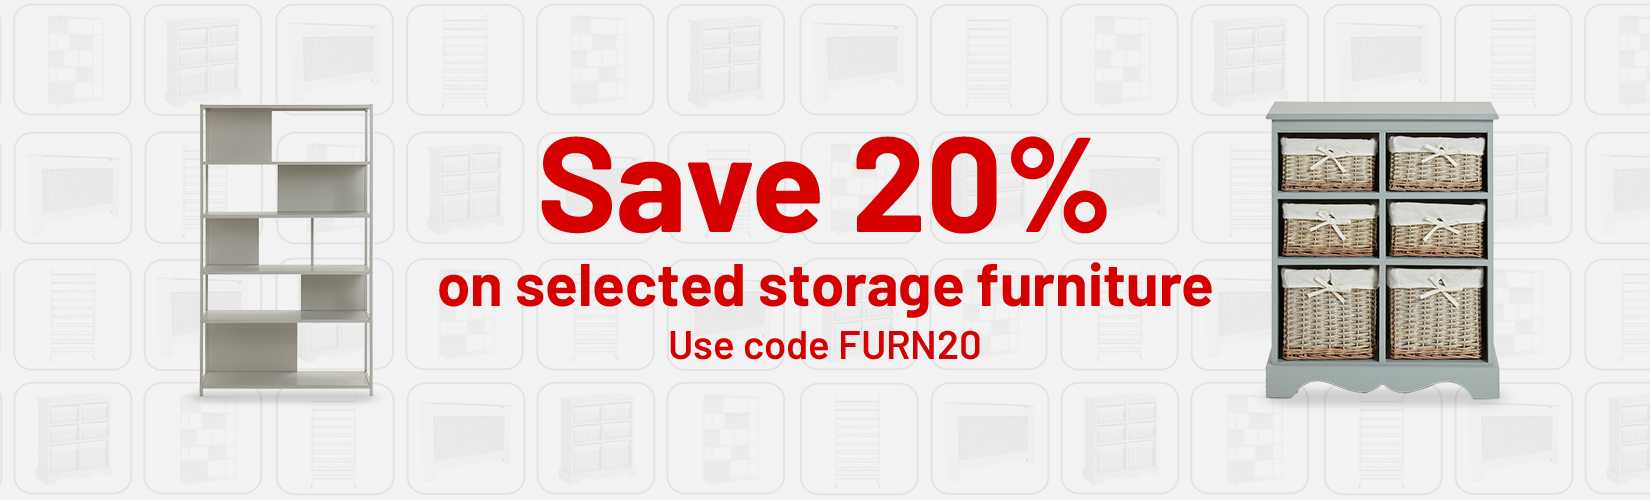 Save 20% on selected storage furniture. Use code FURN20.